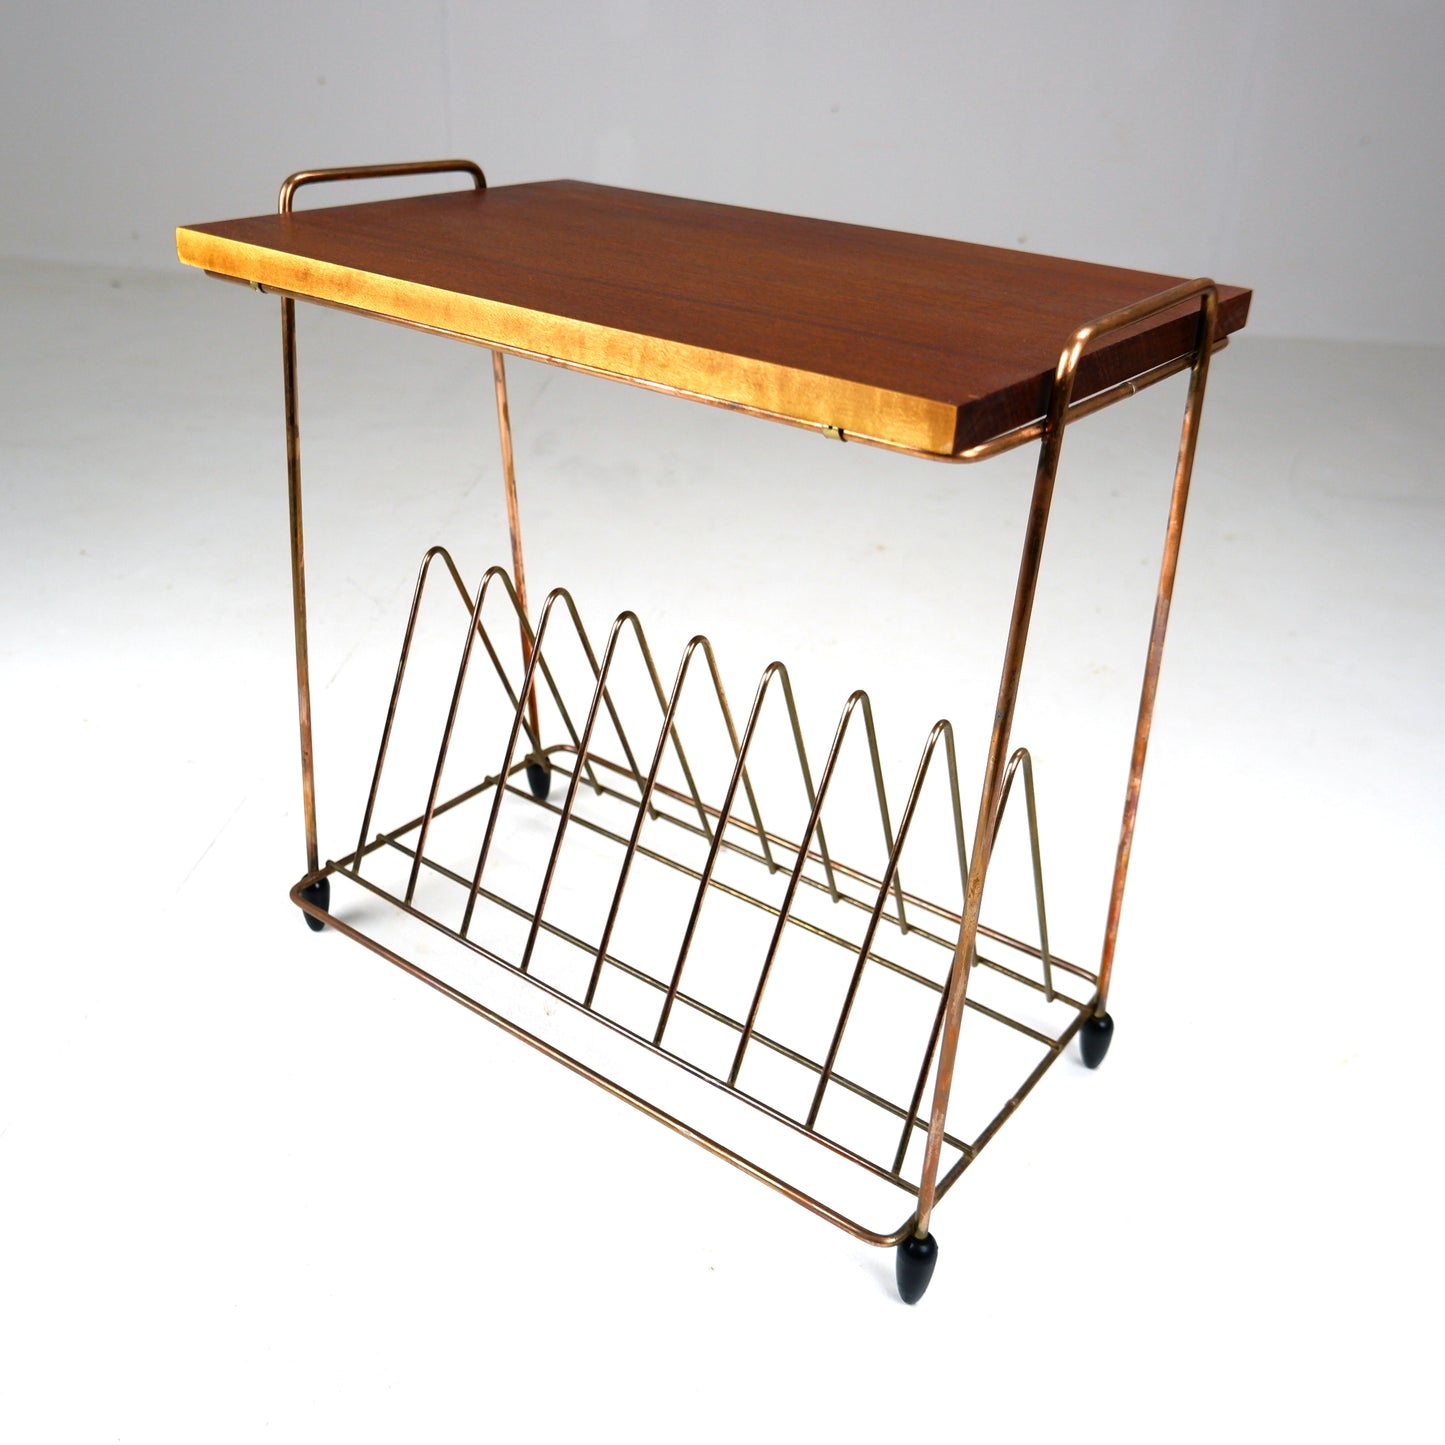 Atomic Style Magazine Rack / Vinyl Storage in Copper and Rosewood - Mid Century